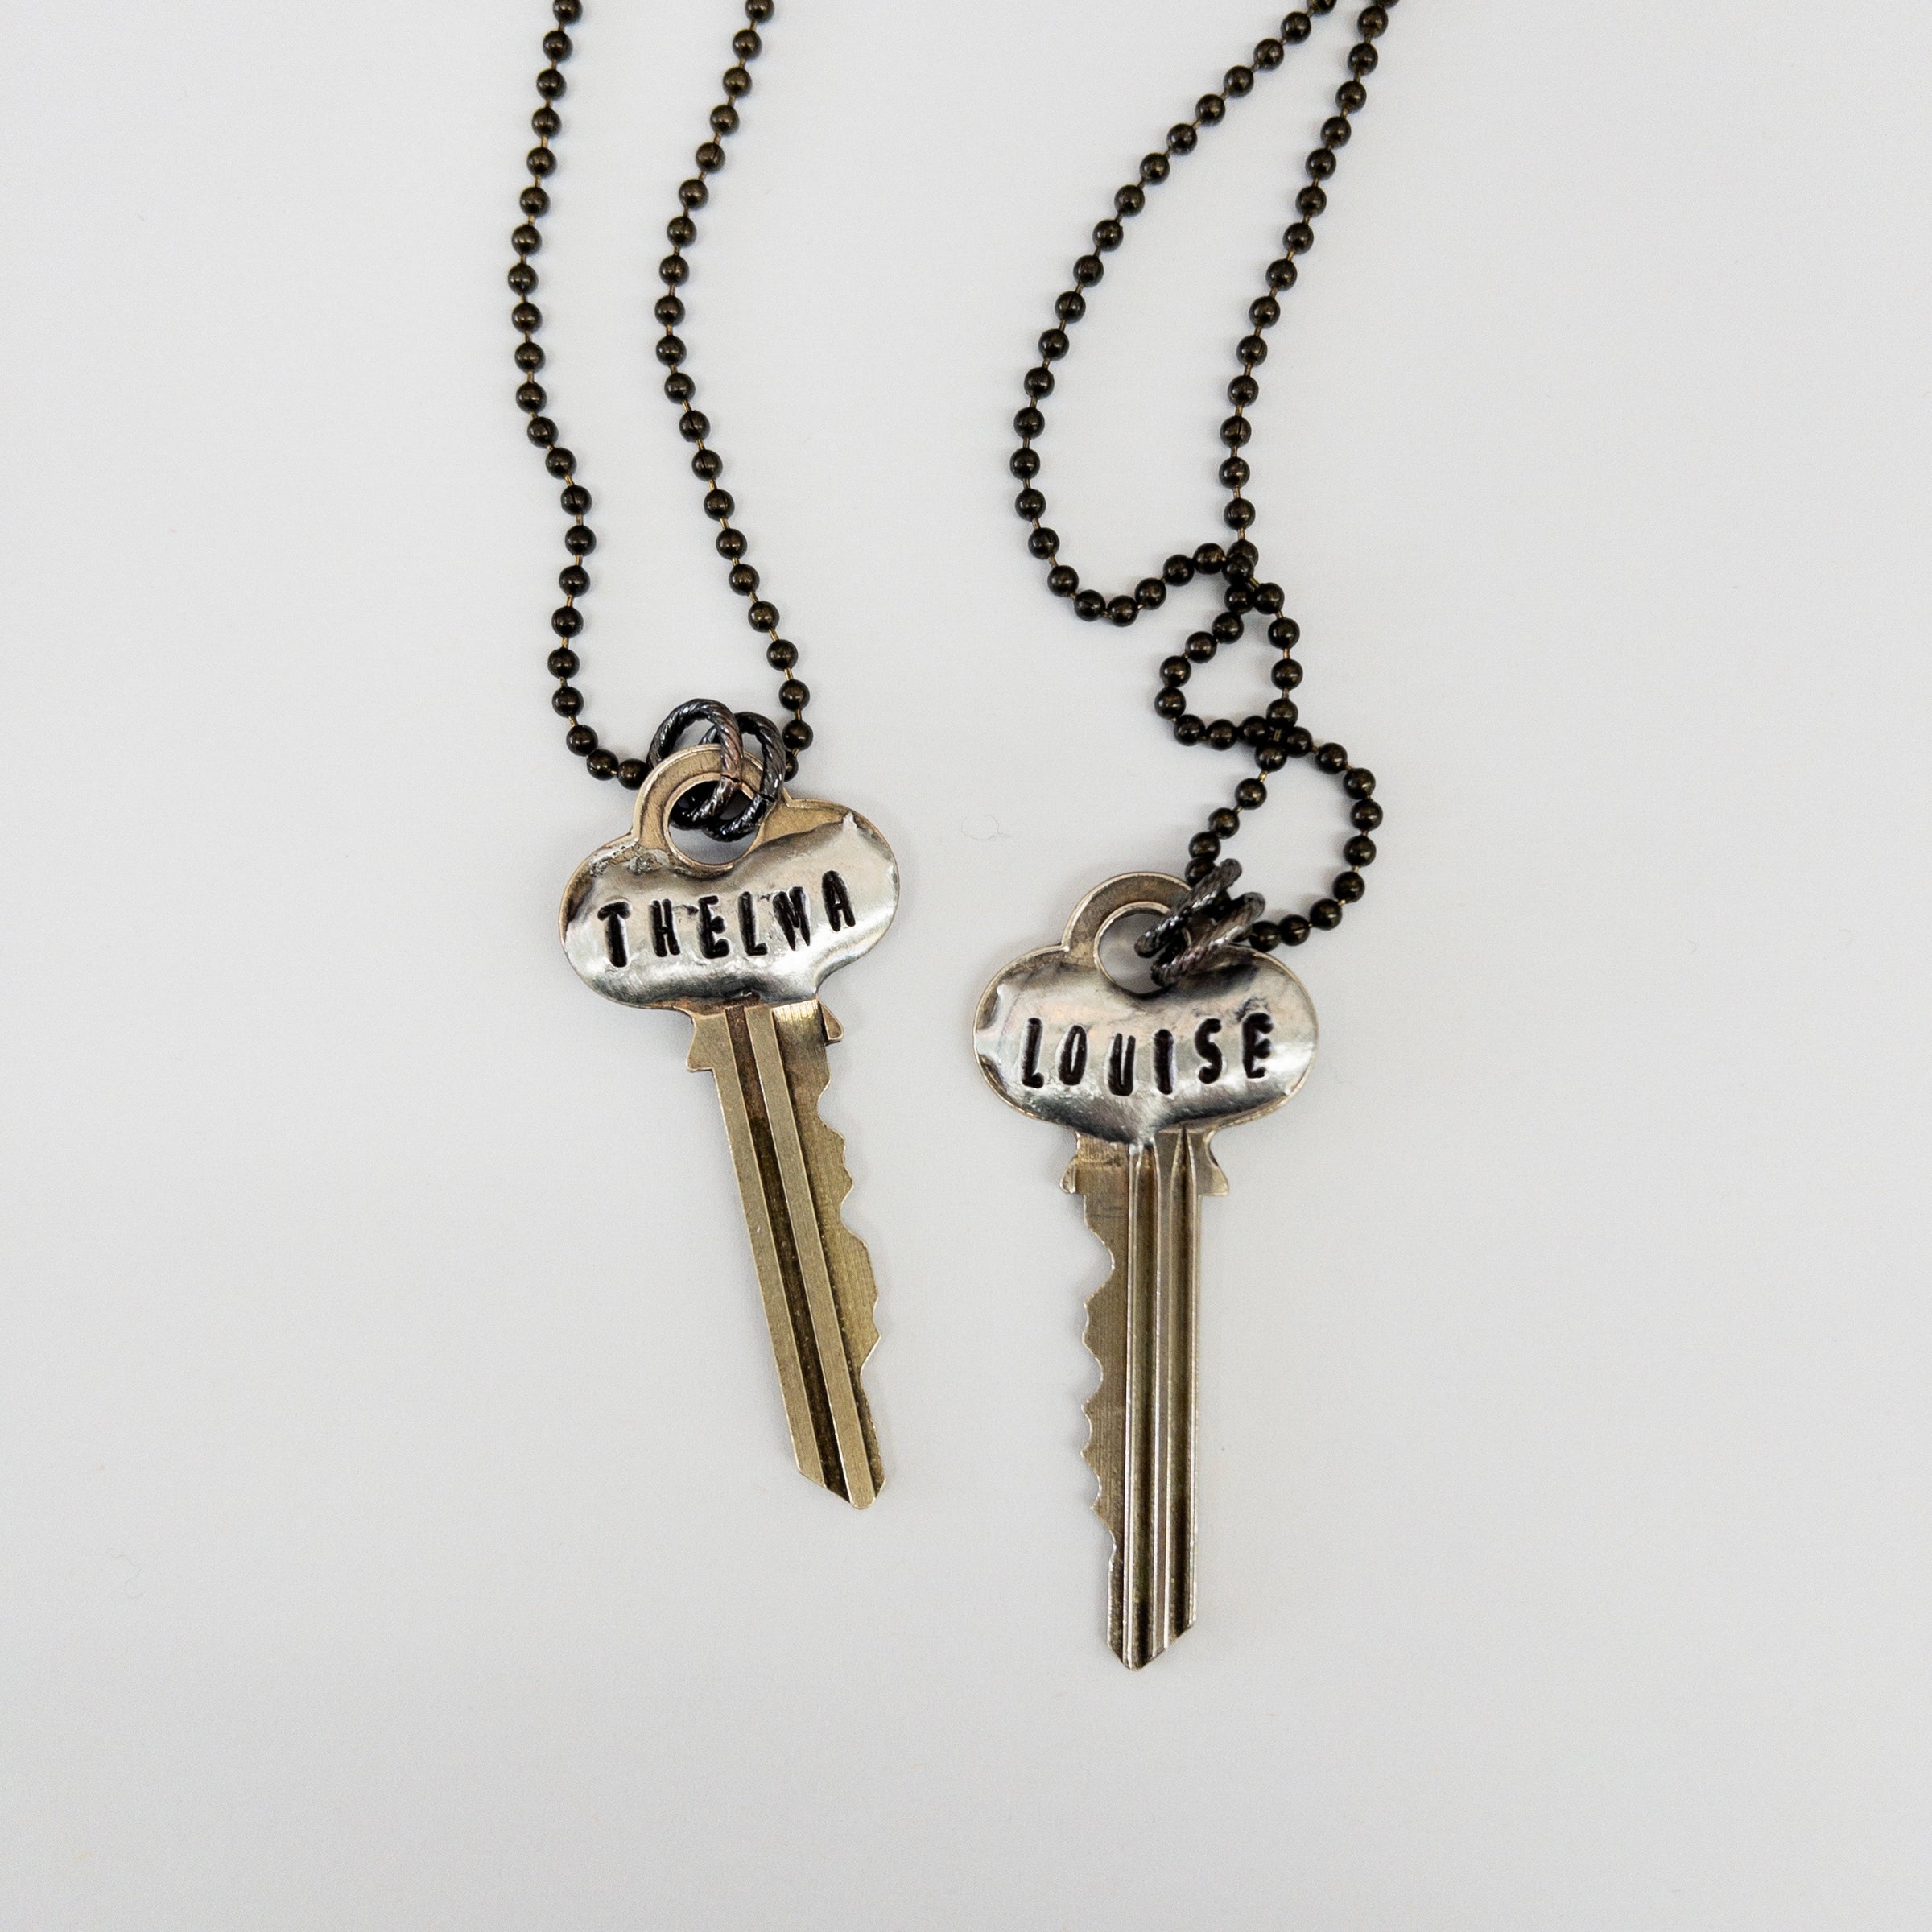 Thelma & Louise Key Necklace